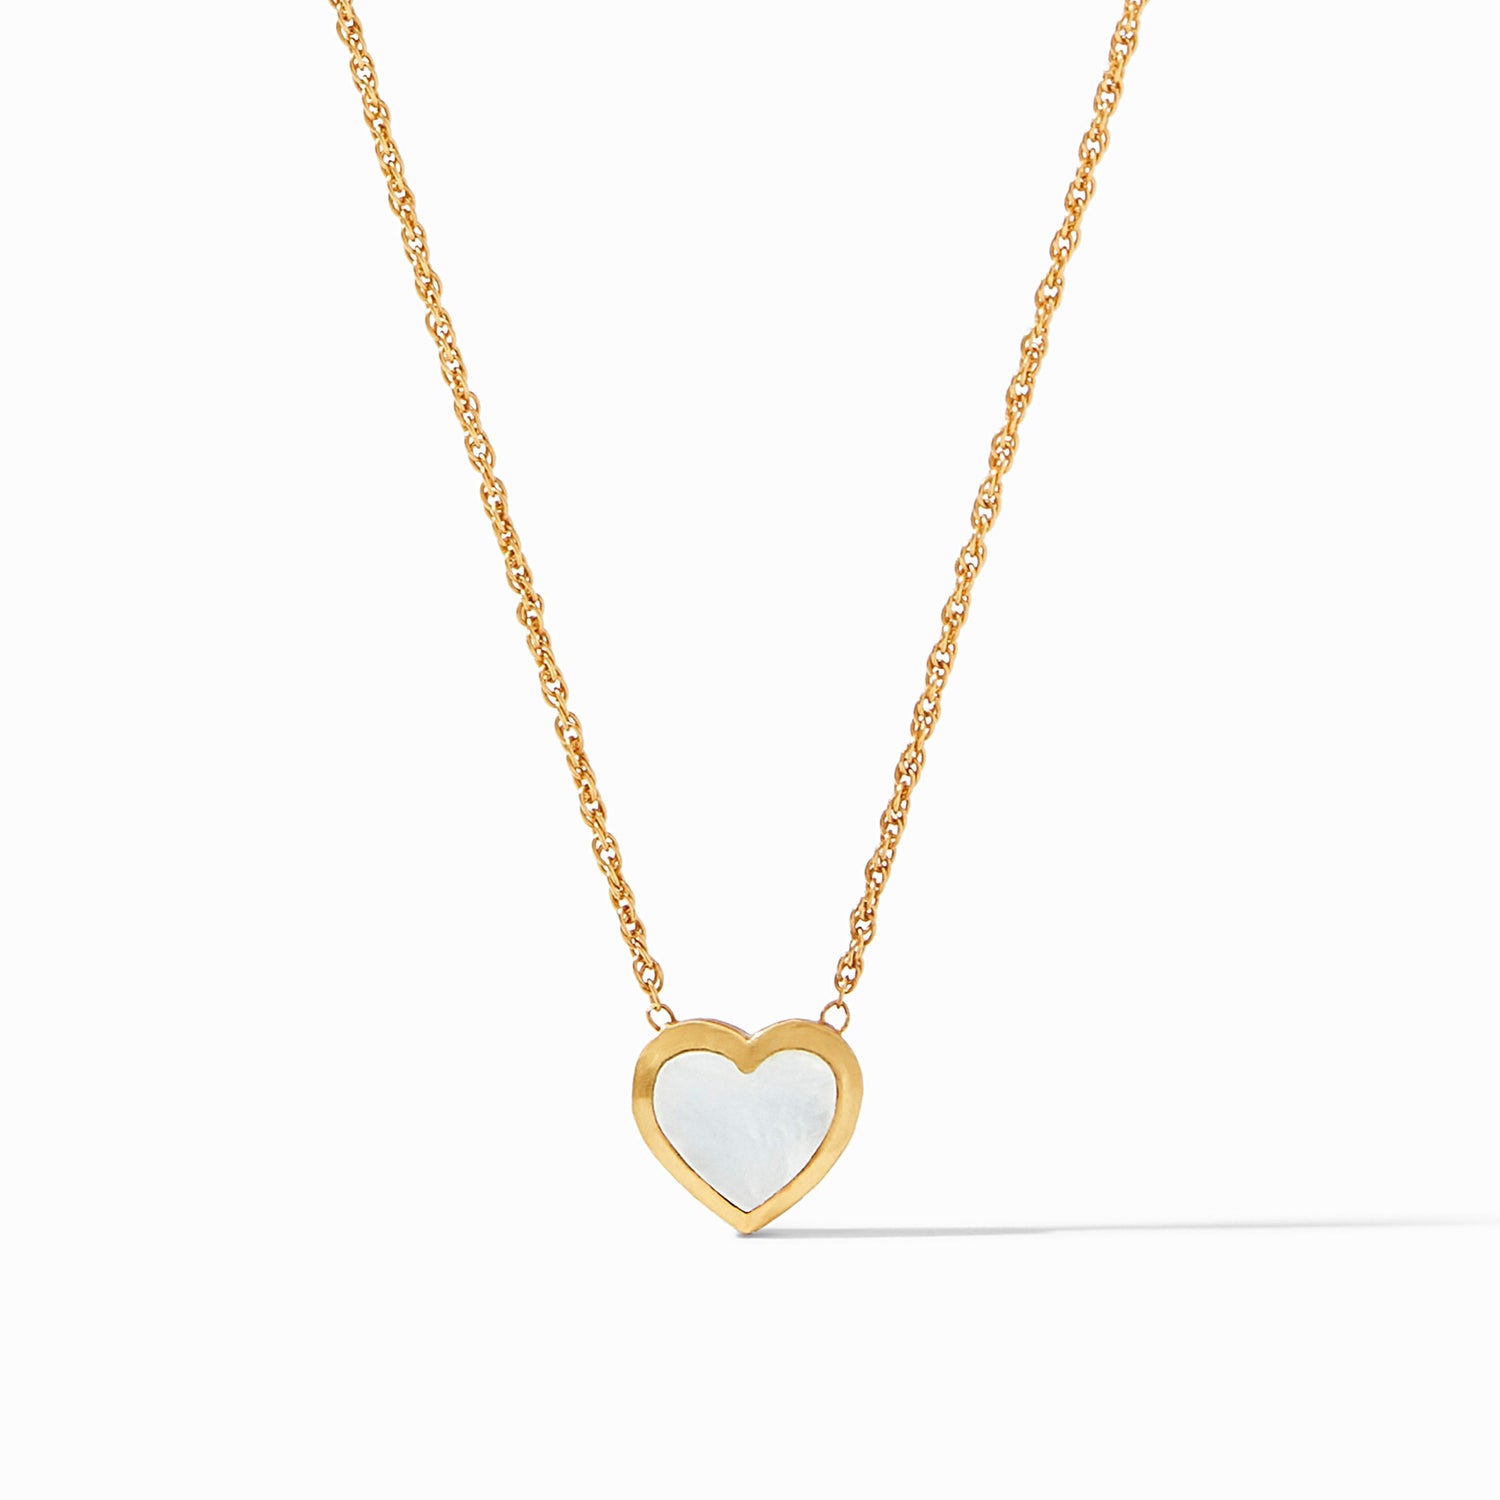 Julie Vos Julie Vos - Heart Solitaire Gold Necklace - Mother of Pearl available at The Good Life Boutique